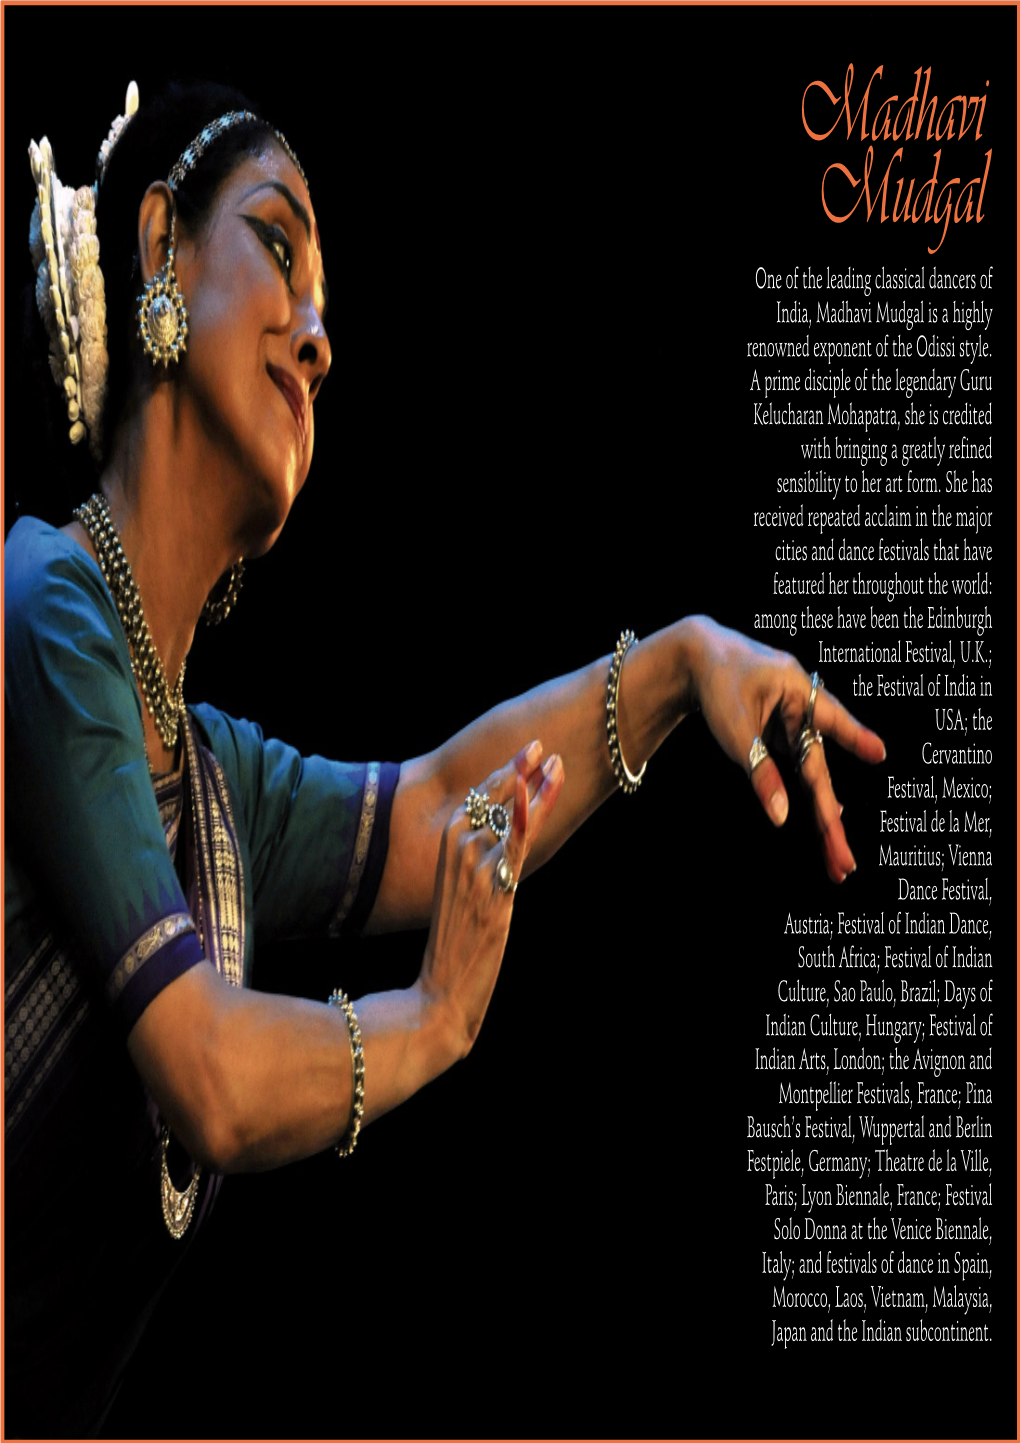 Madhavi Mudgal One of the Leading Classical Dancers of India, Madhavi Mudgal Is a Highly Renowned Exponent of the Odissi Style